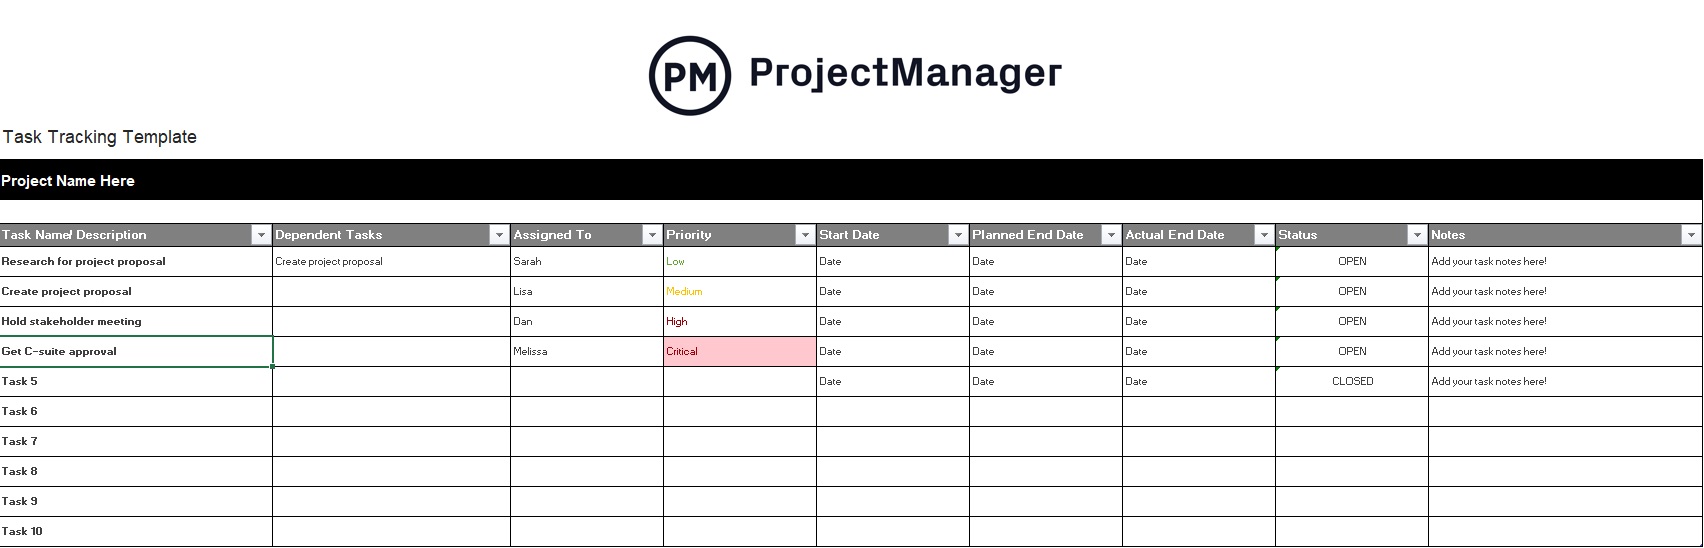 ProjectManager's task tracking template